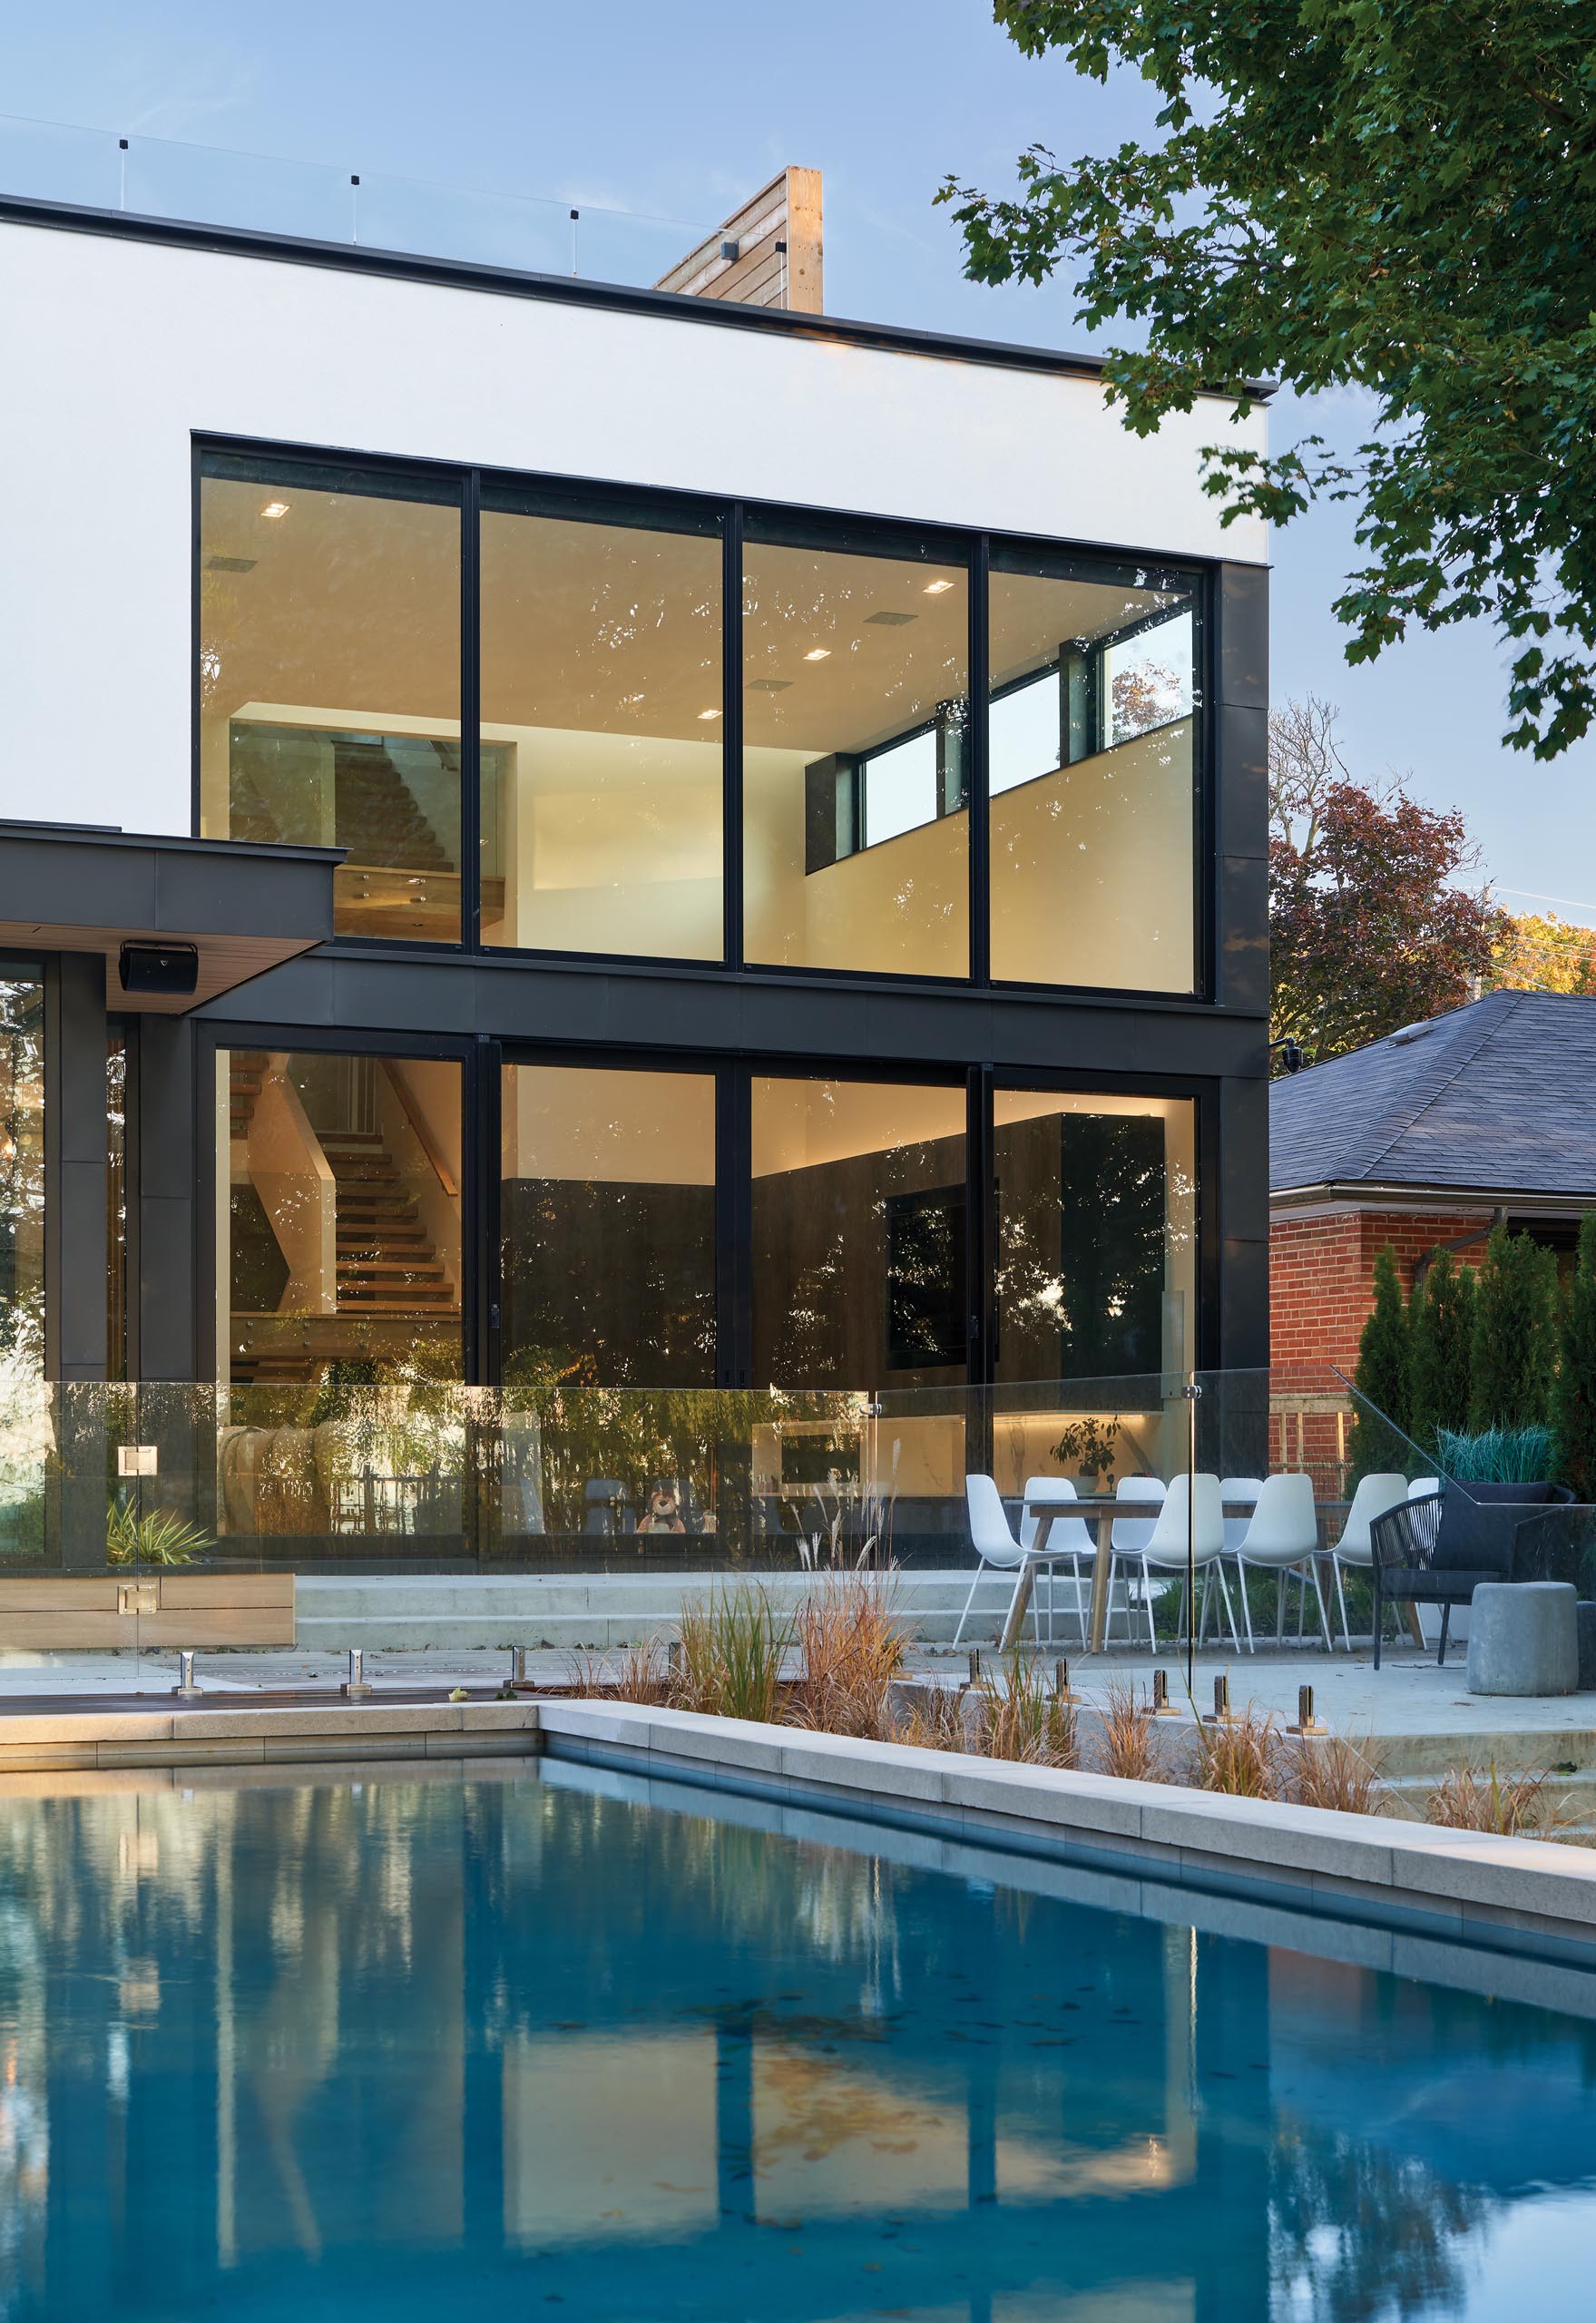 A modern house with double-height windows, a swimming pool, and a patio with room for outdoor dining.